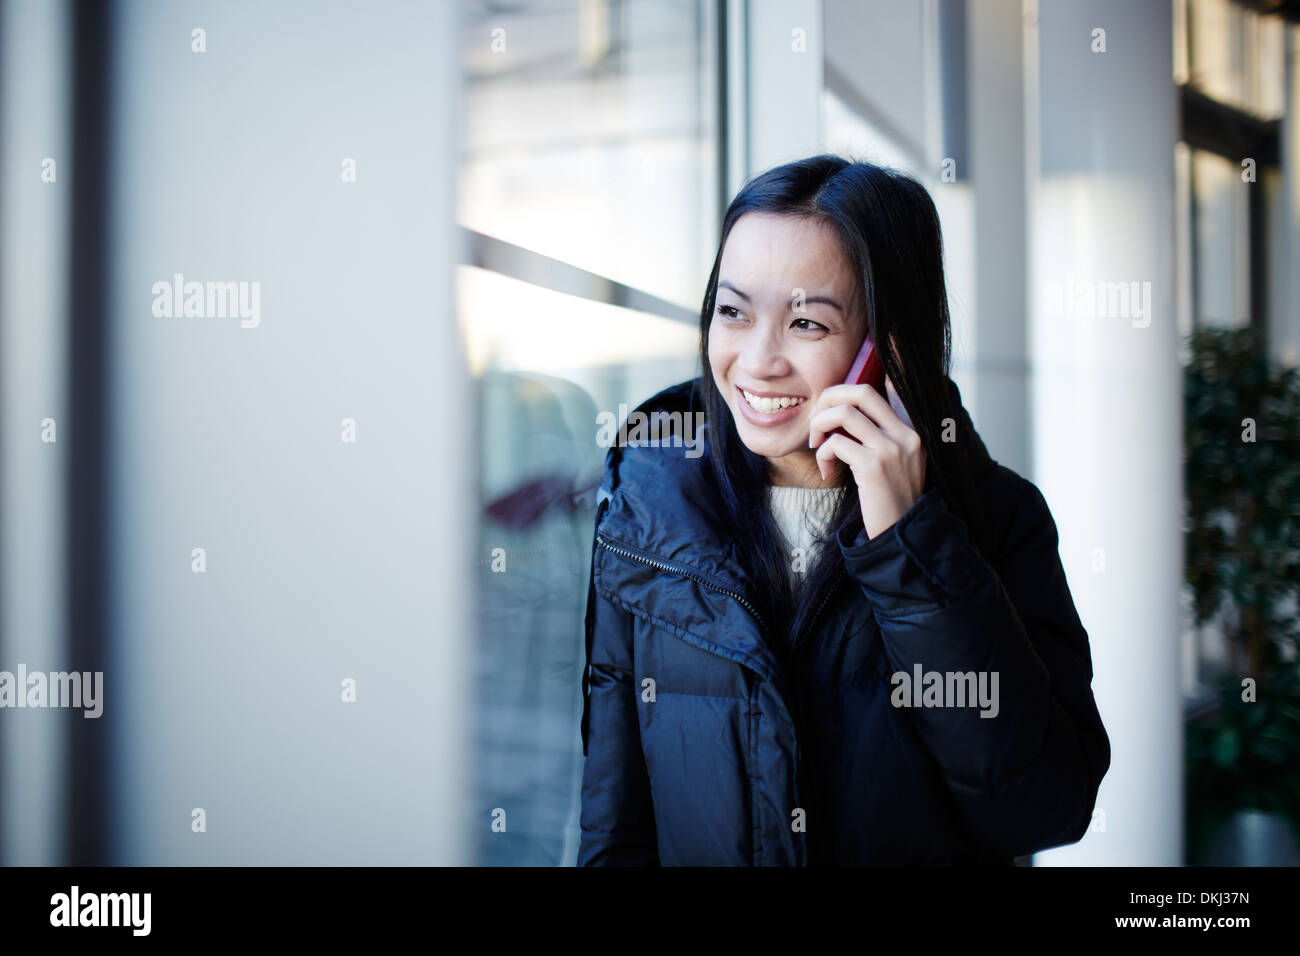 Woman talking on cell phone Stock Photo